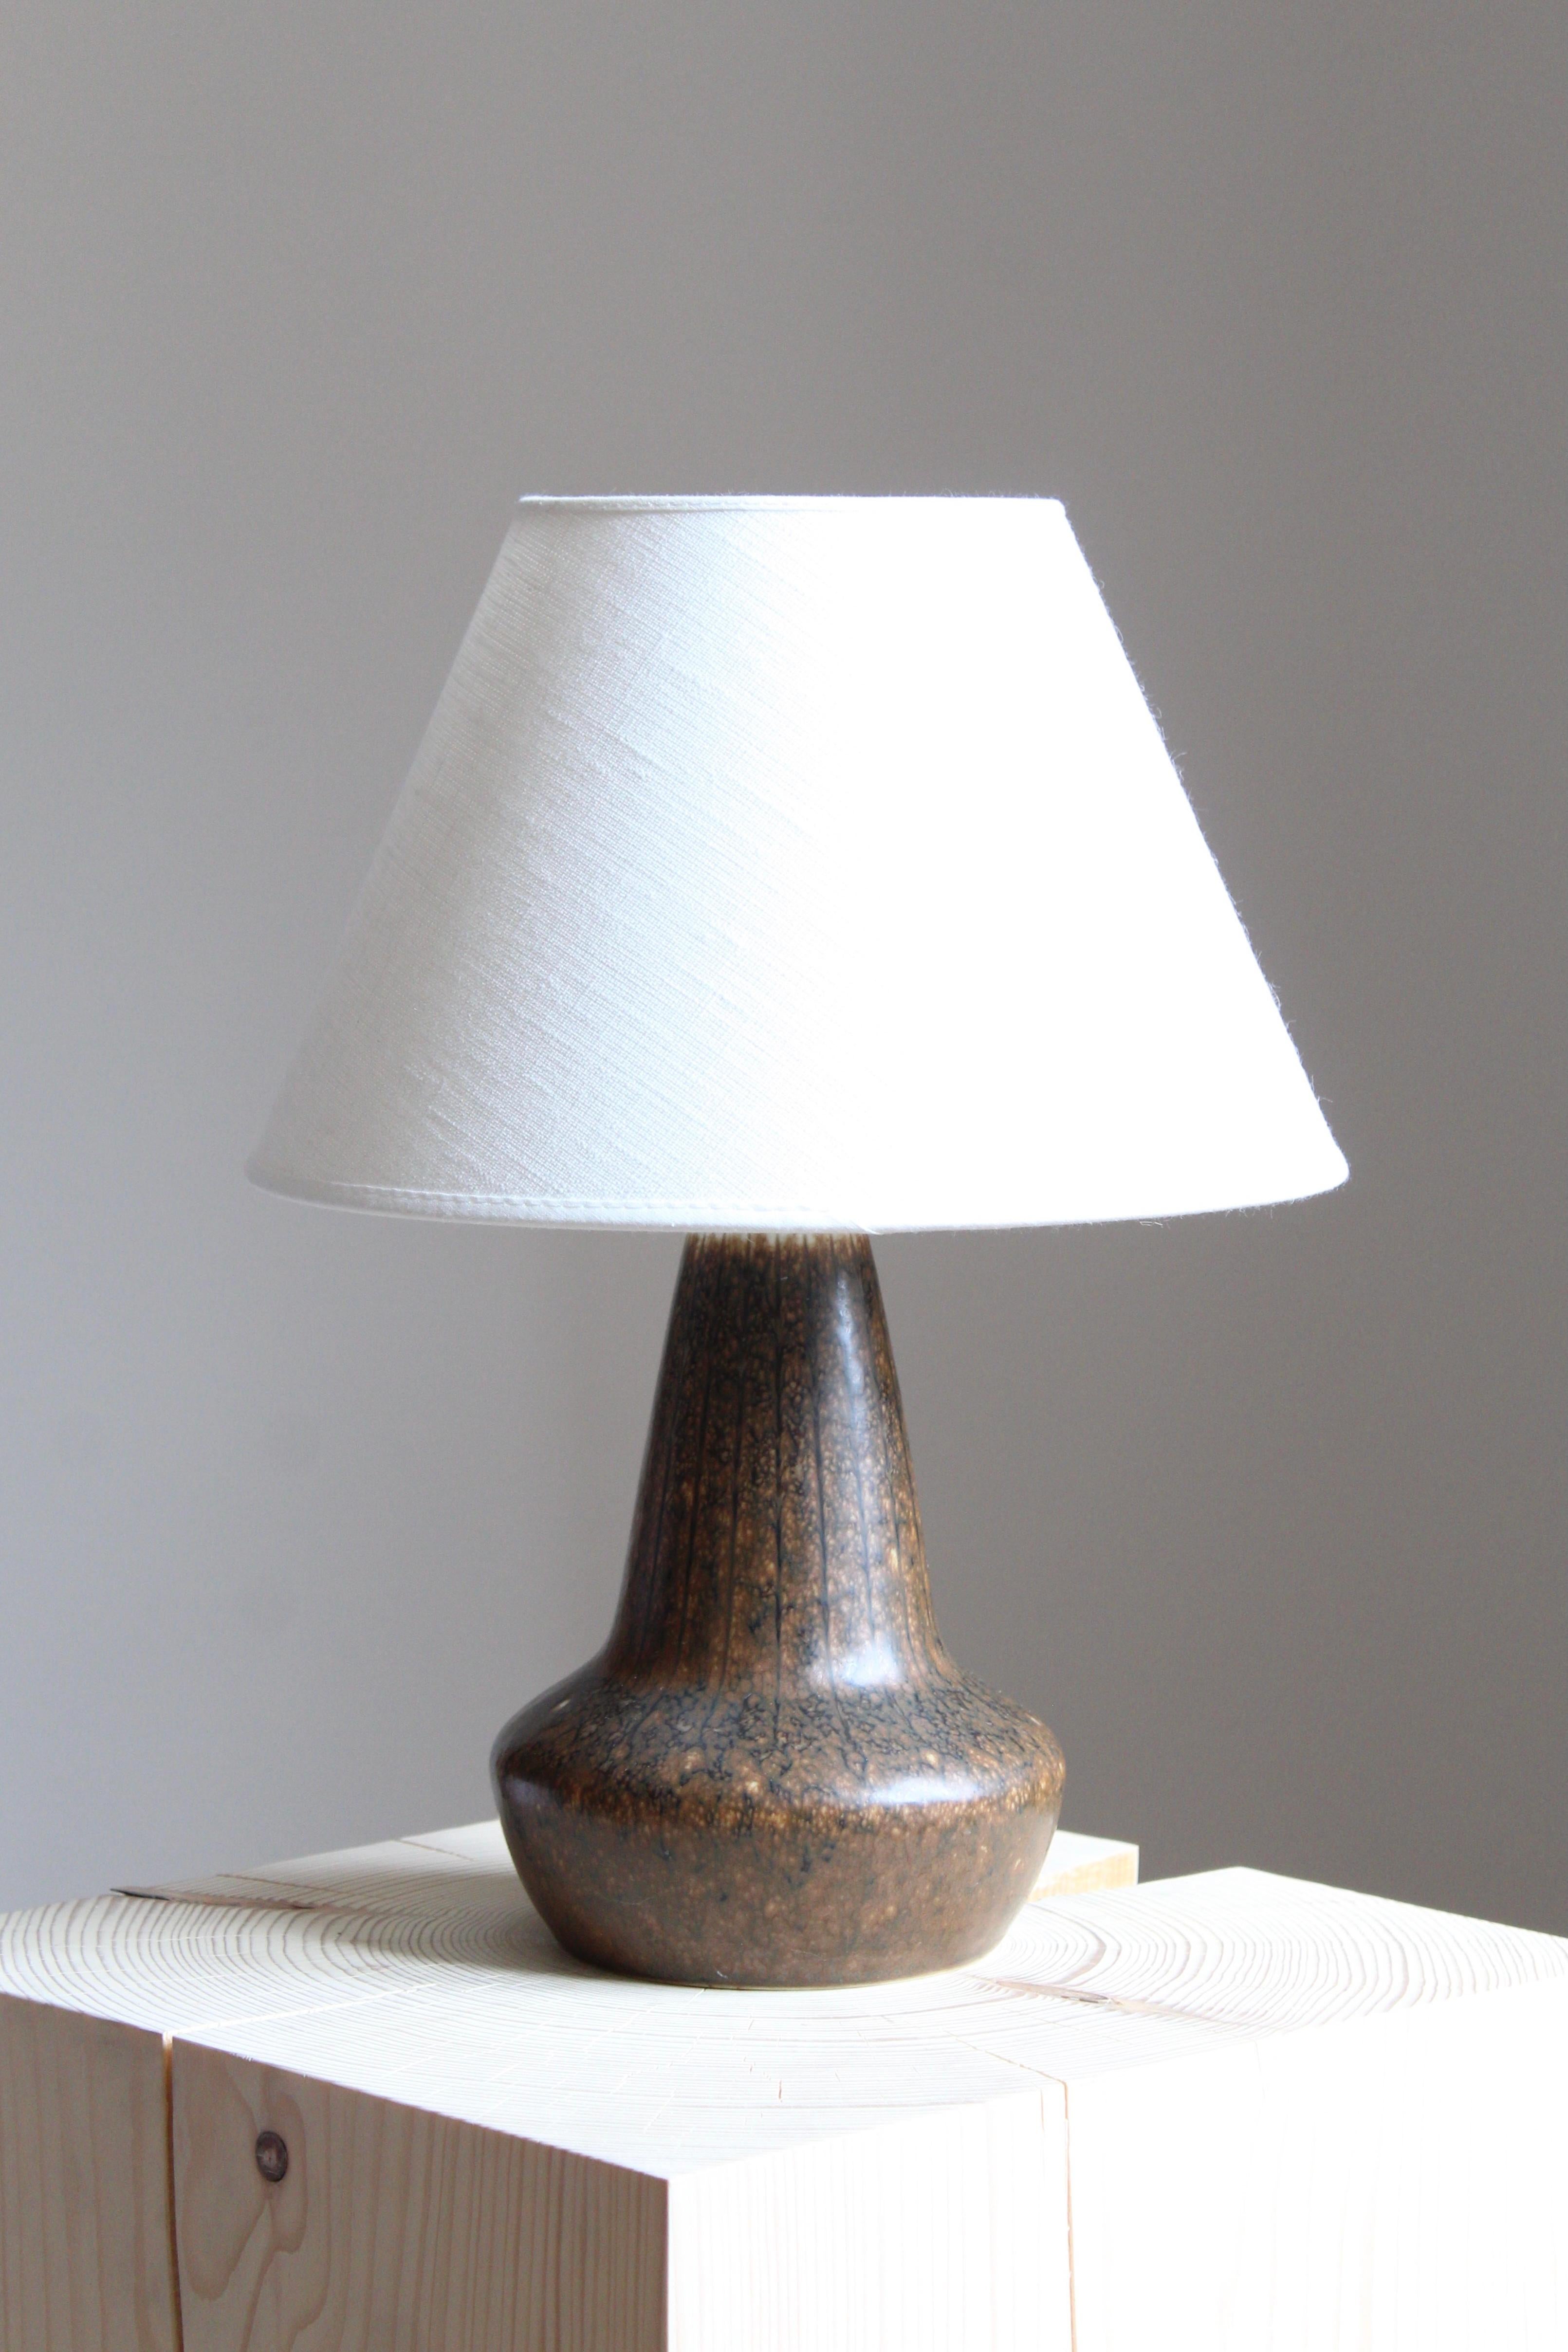 A table lamp produced by Rörstrand, Sweden, 1950s. Designed by Gunnar Nylund, (Swedish, 1914-1997). Signed. Shade not included.

Nylund served as artistic director at Rörstrand, where he worked, 1931-1955. Prior to his work at Rörstrand he was a